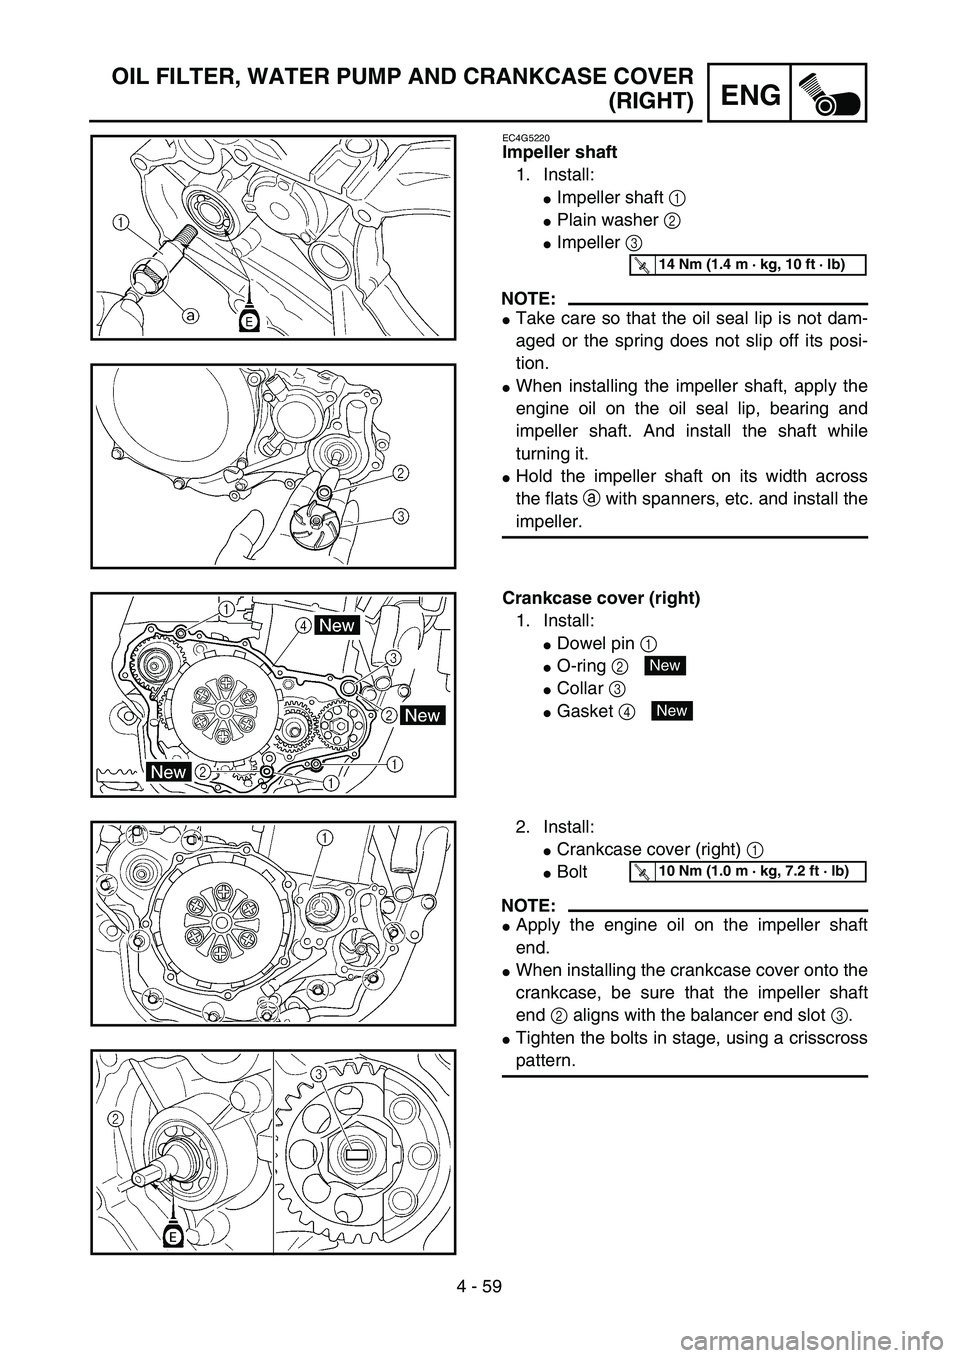 YAMAHA WR 450F 2004  Manuale de Empleo (in Spanish) 4 - 59
ENG
OIL FILTER, WATER PUMP AND CRANKCASE COVER
(RIGHT)
EC4G5220
Impeller shaft
1. Install:
Impeller shaft 1 
Plain washer 2 
Impeller 3 
NOTE:
Take care so that the oil seal lip is not dam-